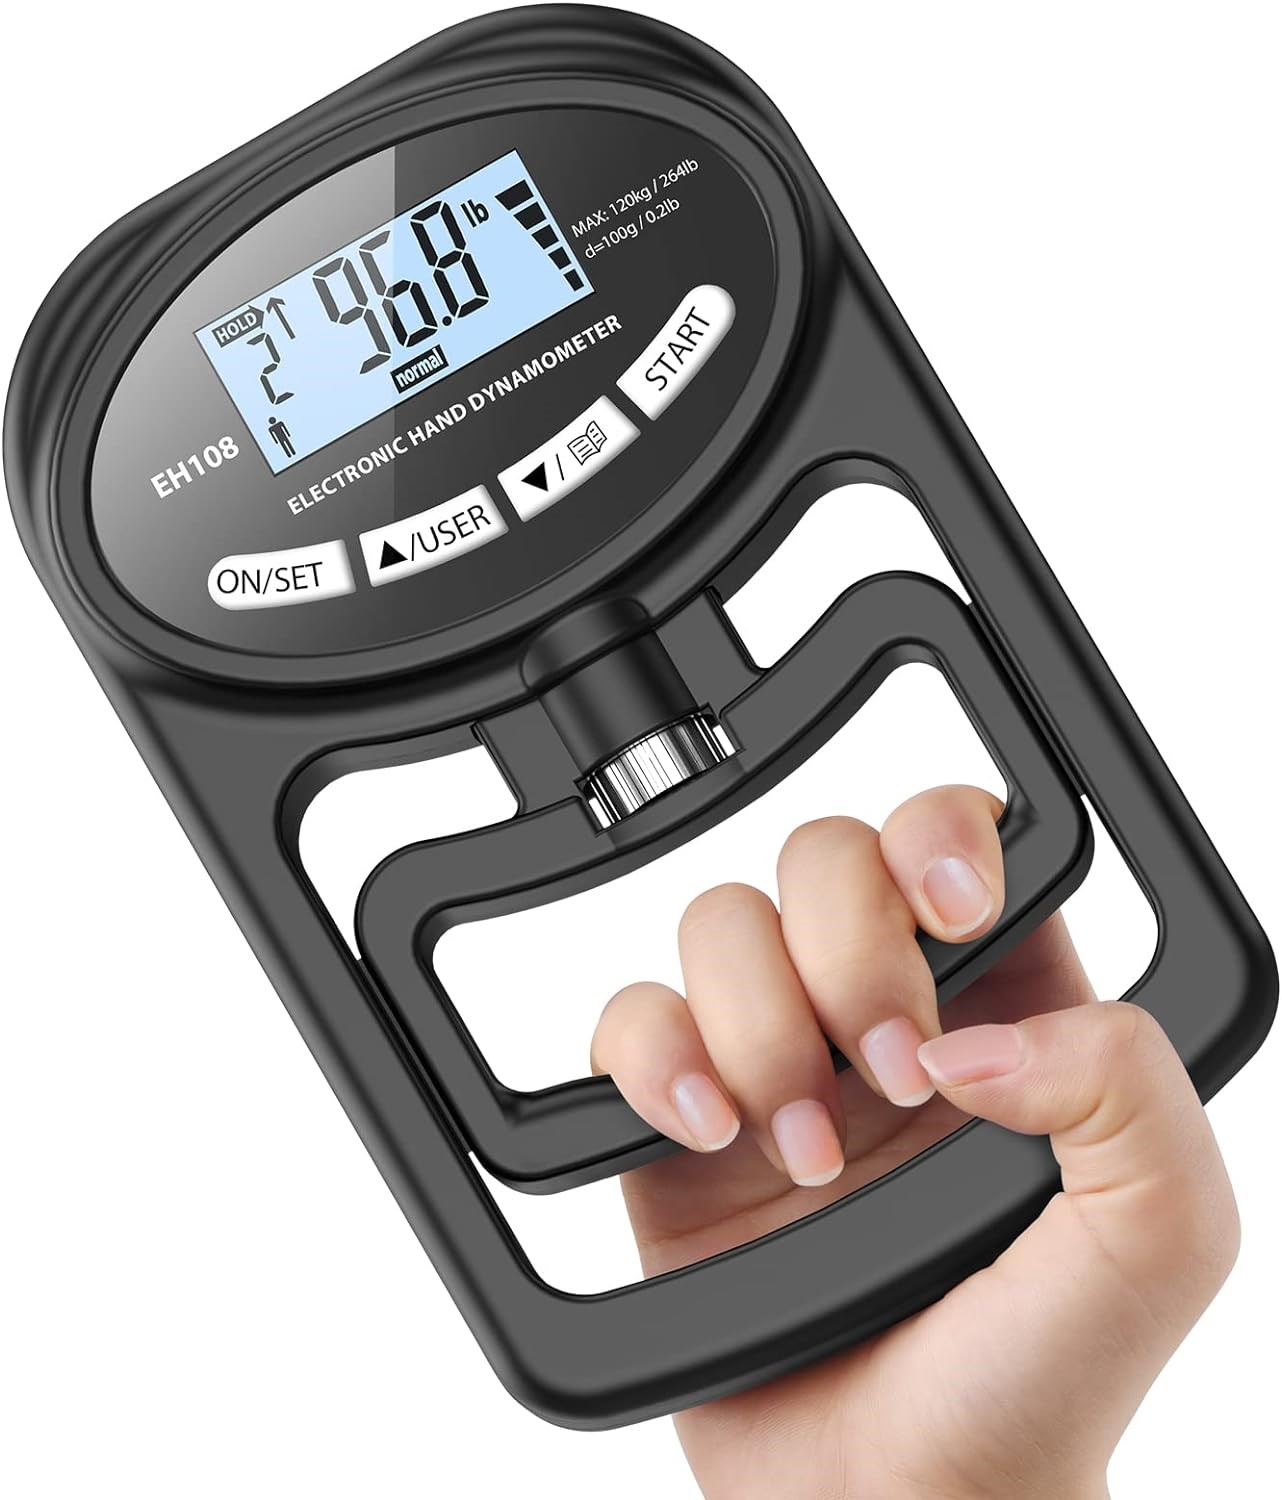 An electric hand dynamometer, a black plastic device with a digital numerical display and a handle designed to be gripped by one hand.